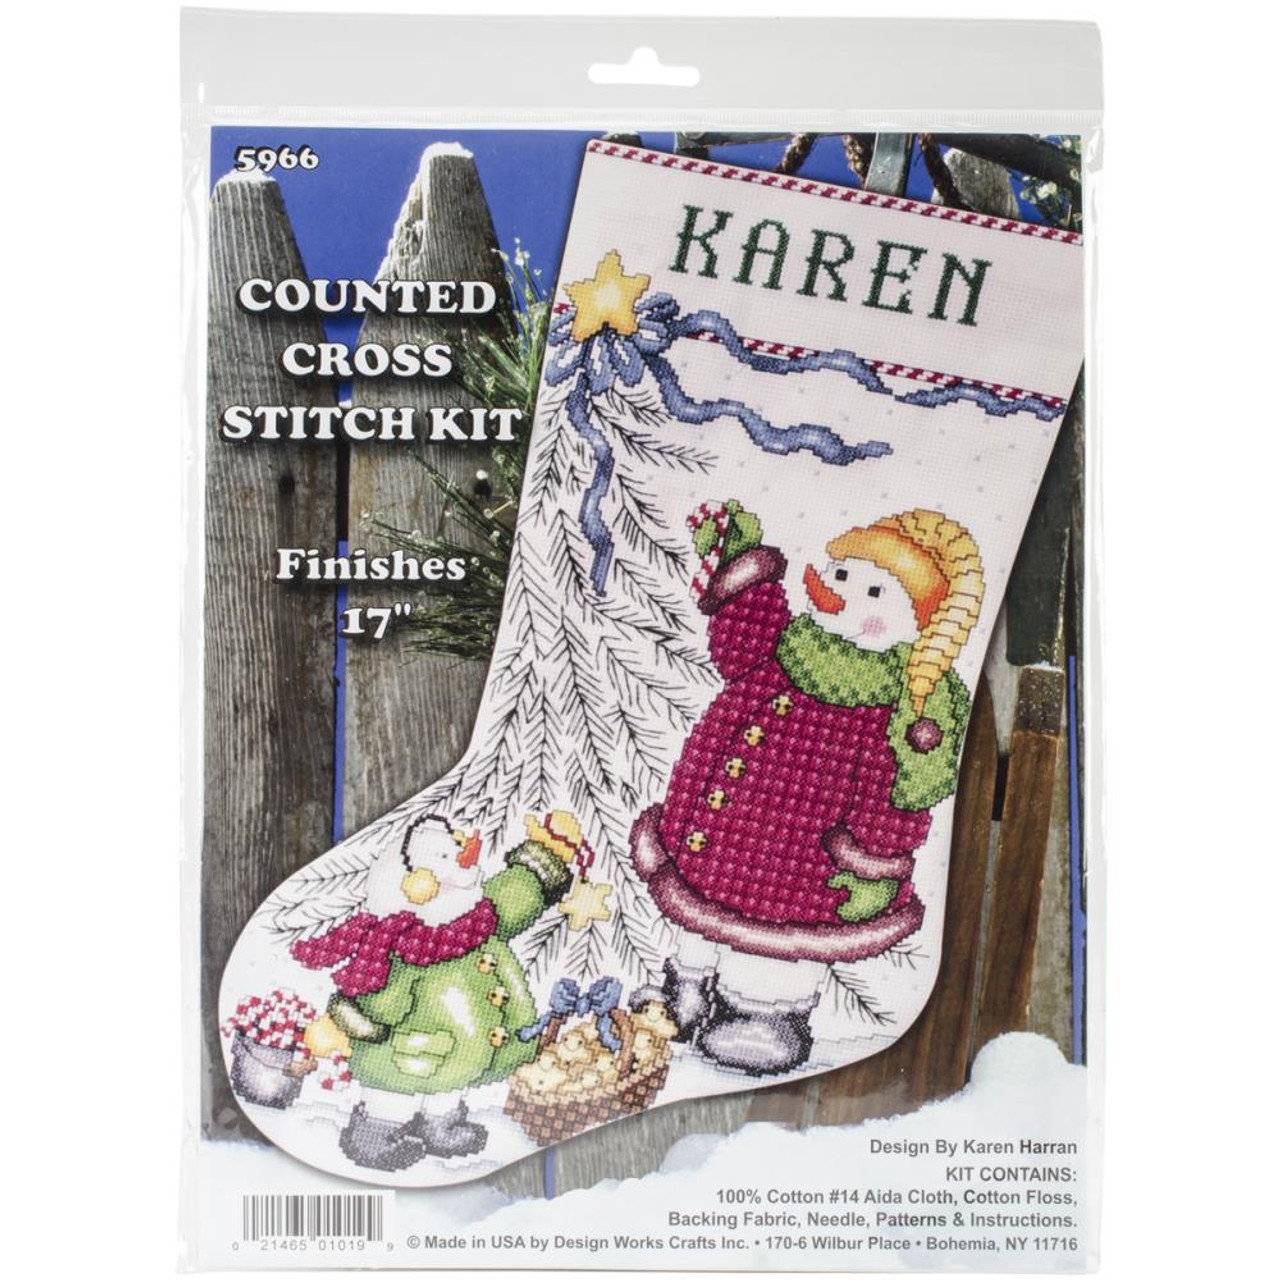 Christmas Tree Snowman Stocking Counted Cross Stitch Kit 17 Long 14 Count